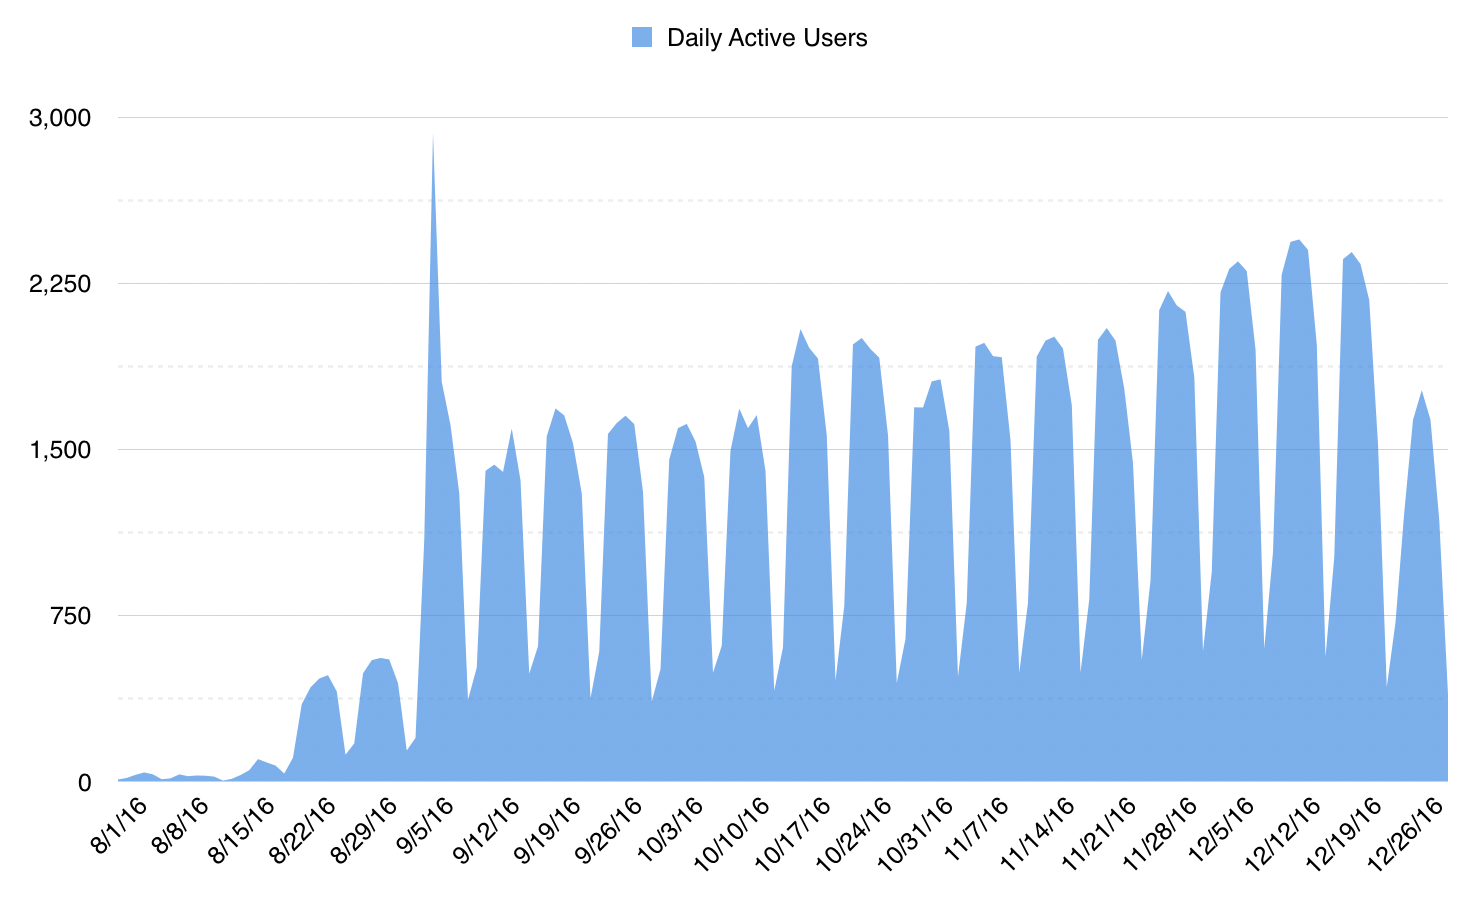 Insomnia Daily Active Users December 2016